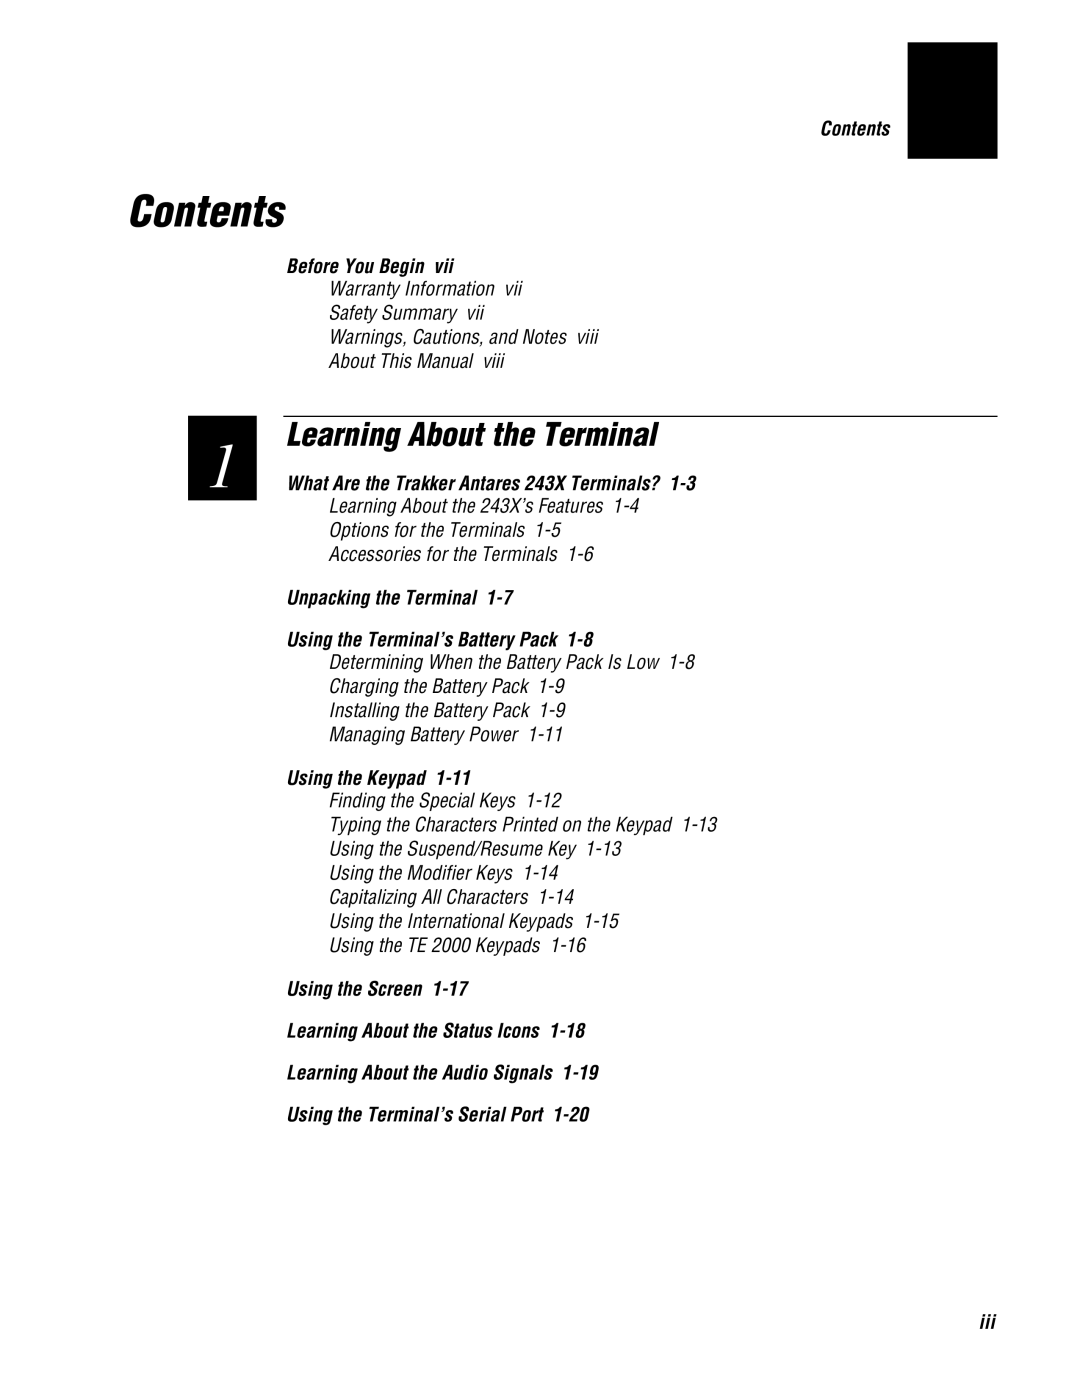 IBM user manual Contents, Learning About the Terminal, Before You Begin, What Are the Trakker Antares 243X Terminals? 